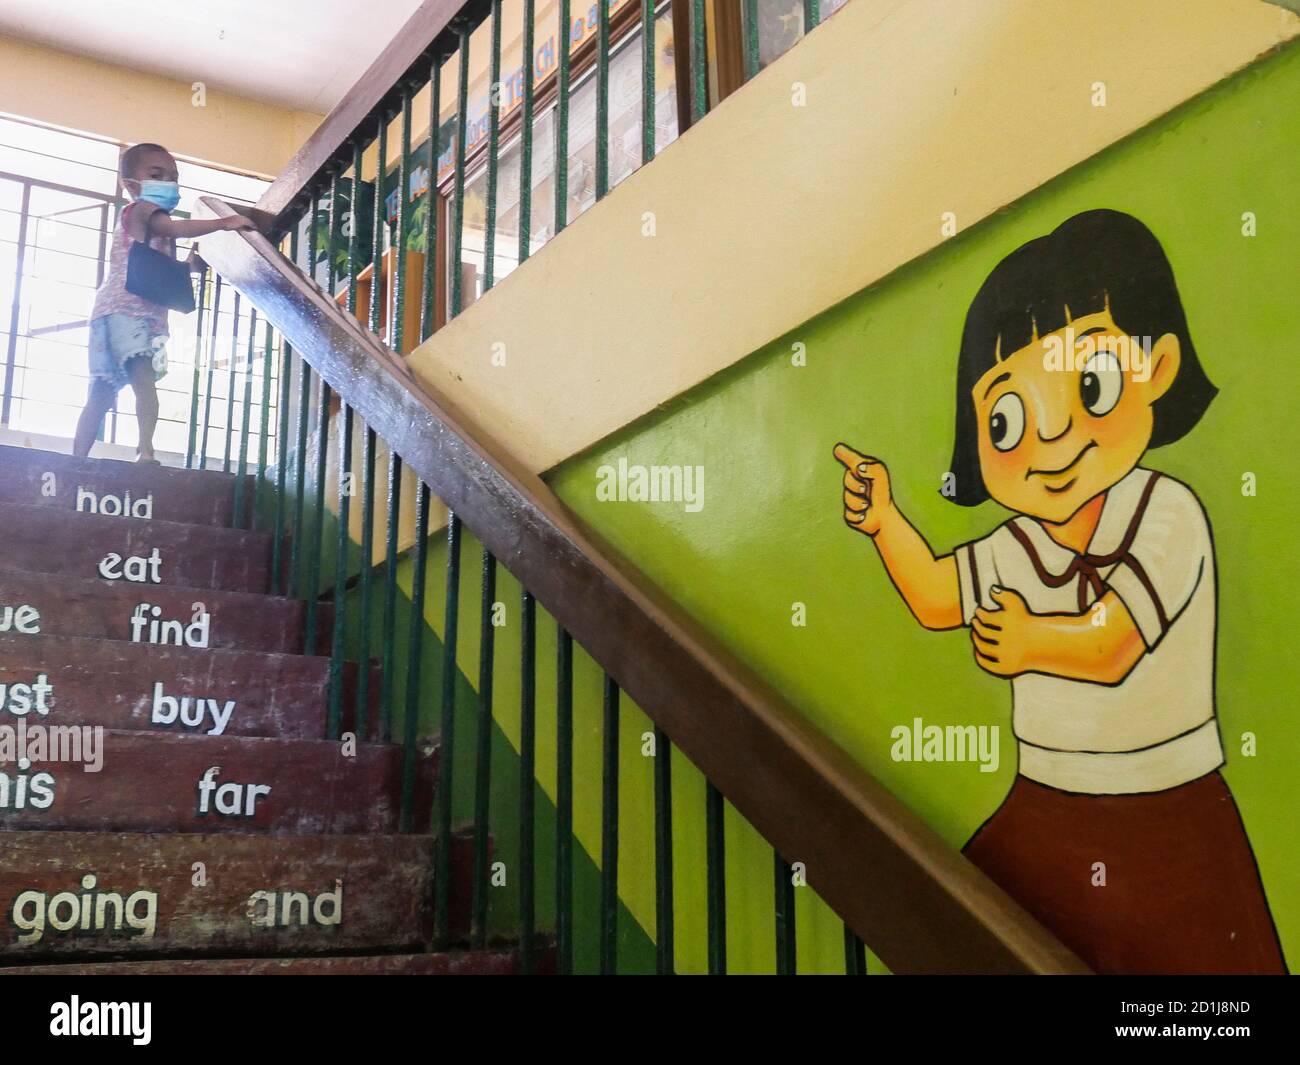 Talon 5, Las Pinas City, Philippines - 10/05/2020: A child climbs the stairs inside the empty Moonwalk Elementary School in Talon 5, Las Pinas City. Today is the opening of classes as scheduled by the Department of Education but due to covid-19 paandemic, students are not required to physically report to school but to study and learn instead via Subject Modules handouts prepared and given by subject teachers. Prior to the opening, the said school had conducted a survey asking Parents if they prefer Online Learning or Modular Learning, only (10%) ten percent favored Online learning due to inh Stock Photo